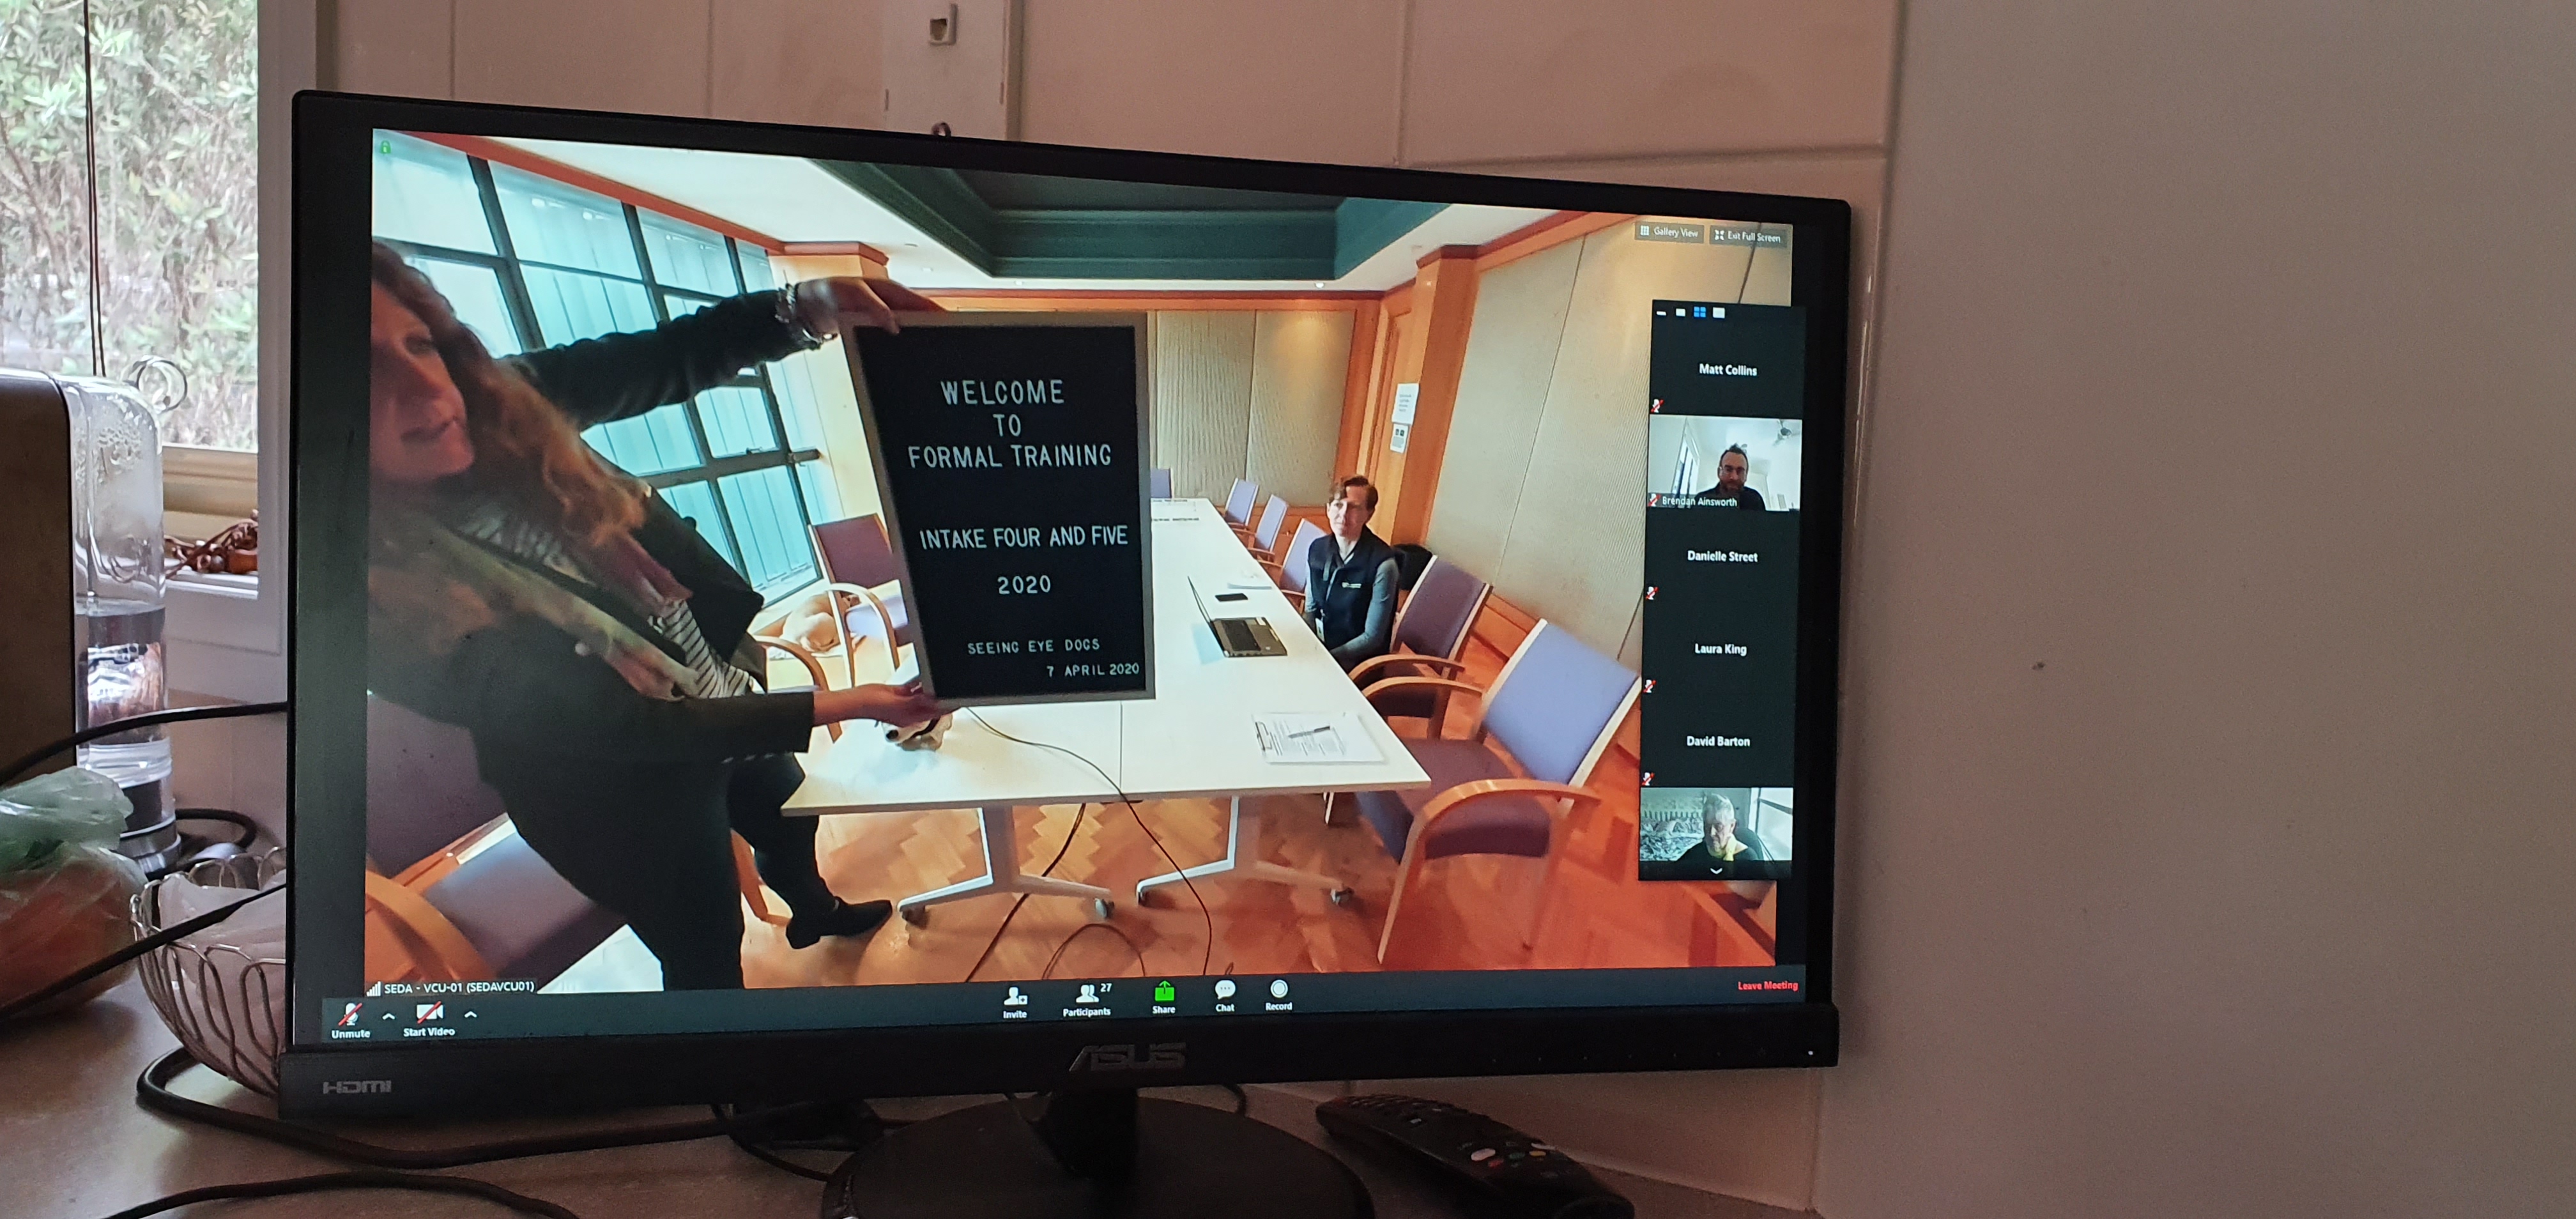 A computer screen joining the videoconference shows Puppy Development Manager Jane holding up a sign reading "Welcome to formal training, Intake Four and Five, 7th April 2020 